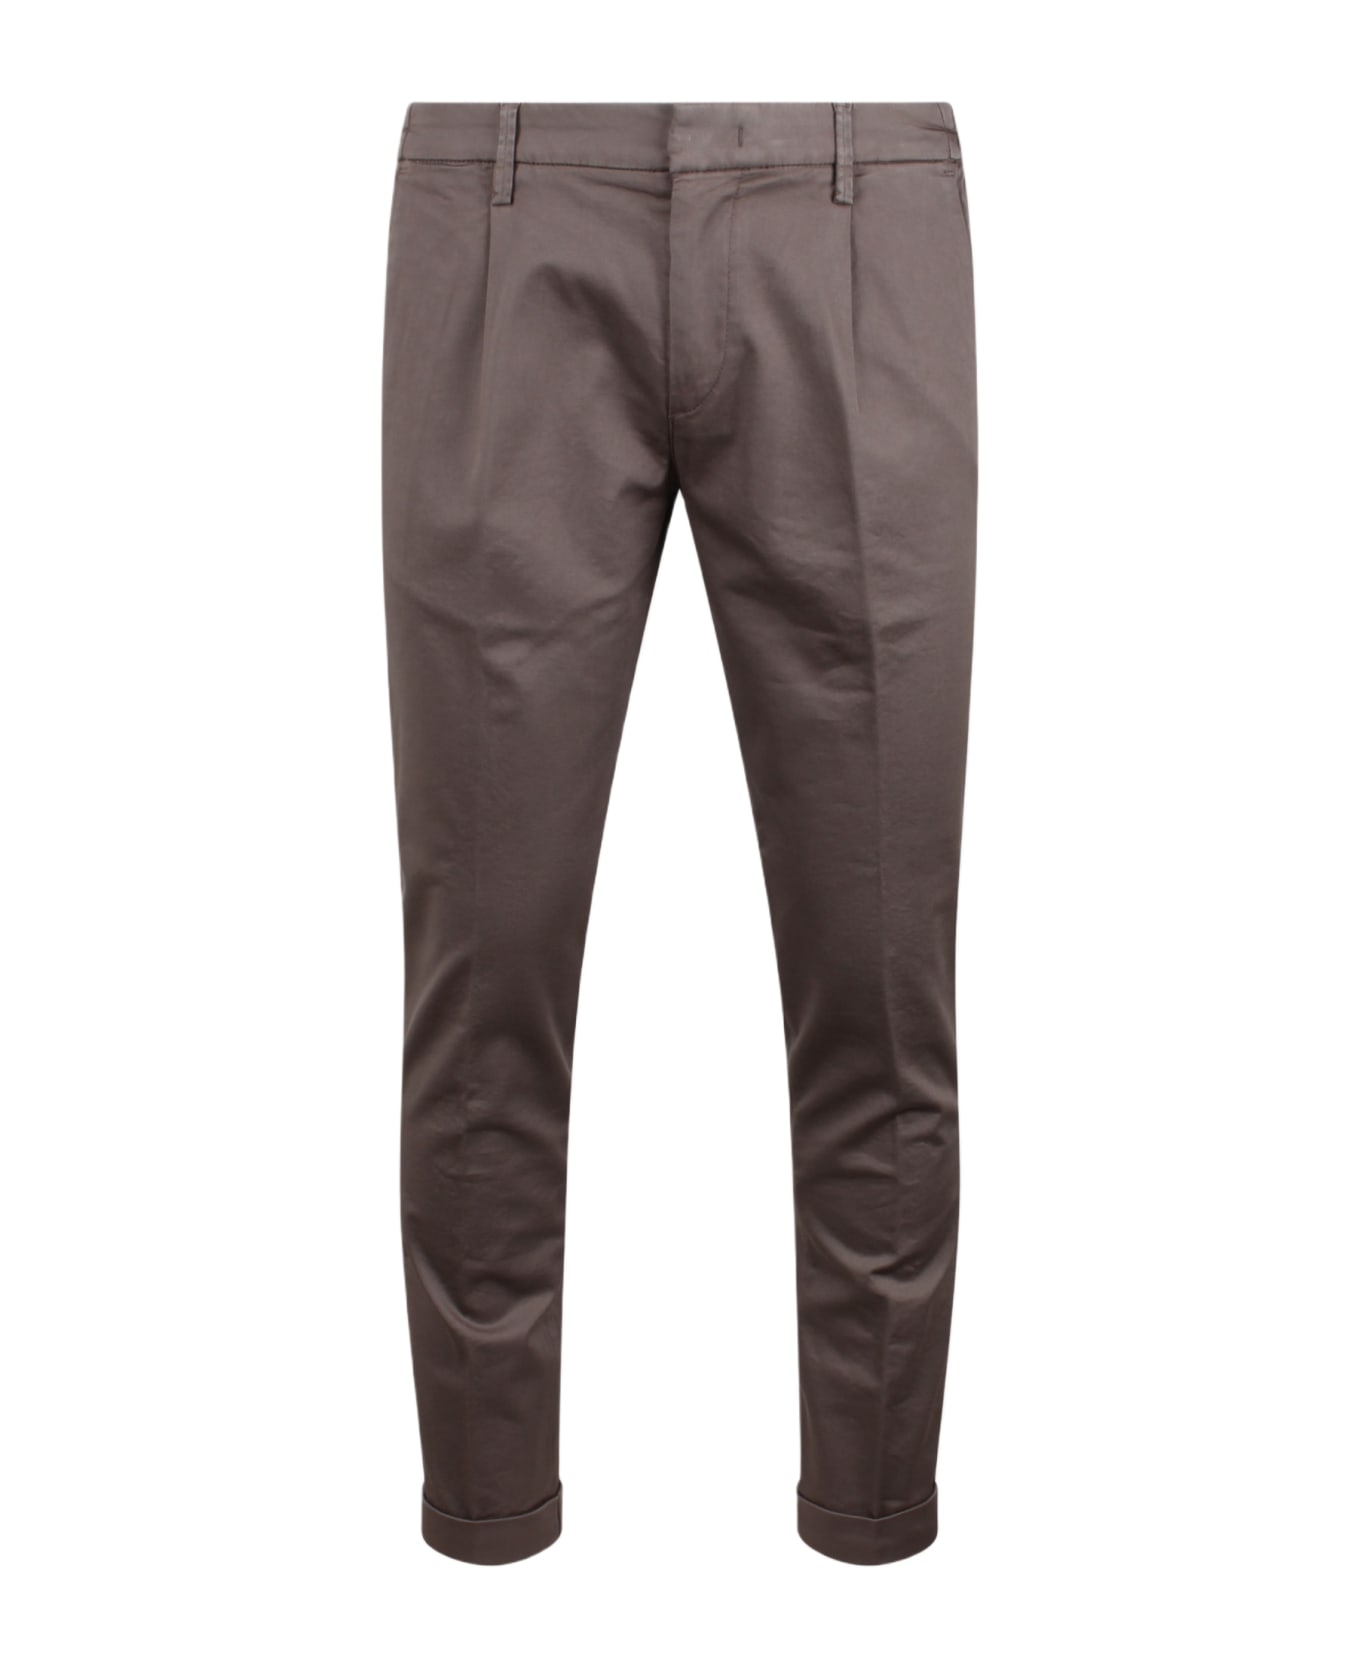 Re-HasH Mucha Tp Chino Pant - Nude & Neutrals